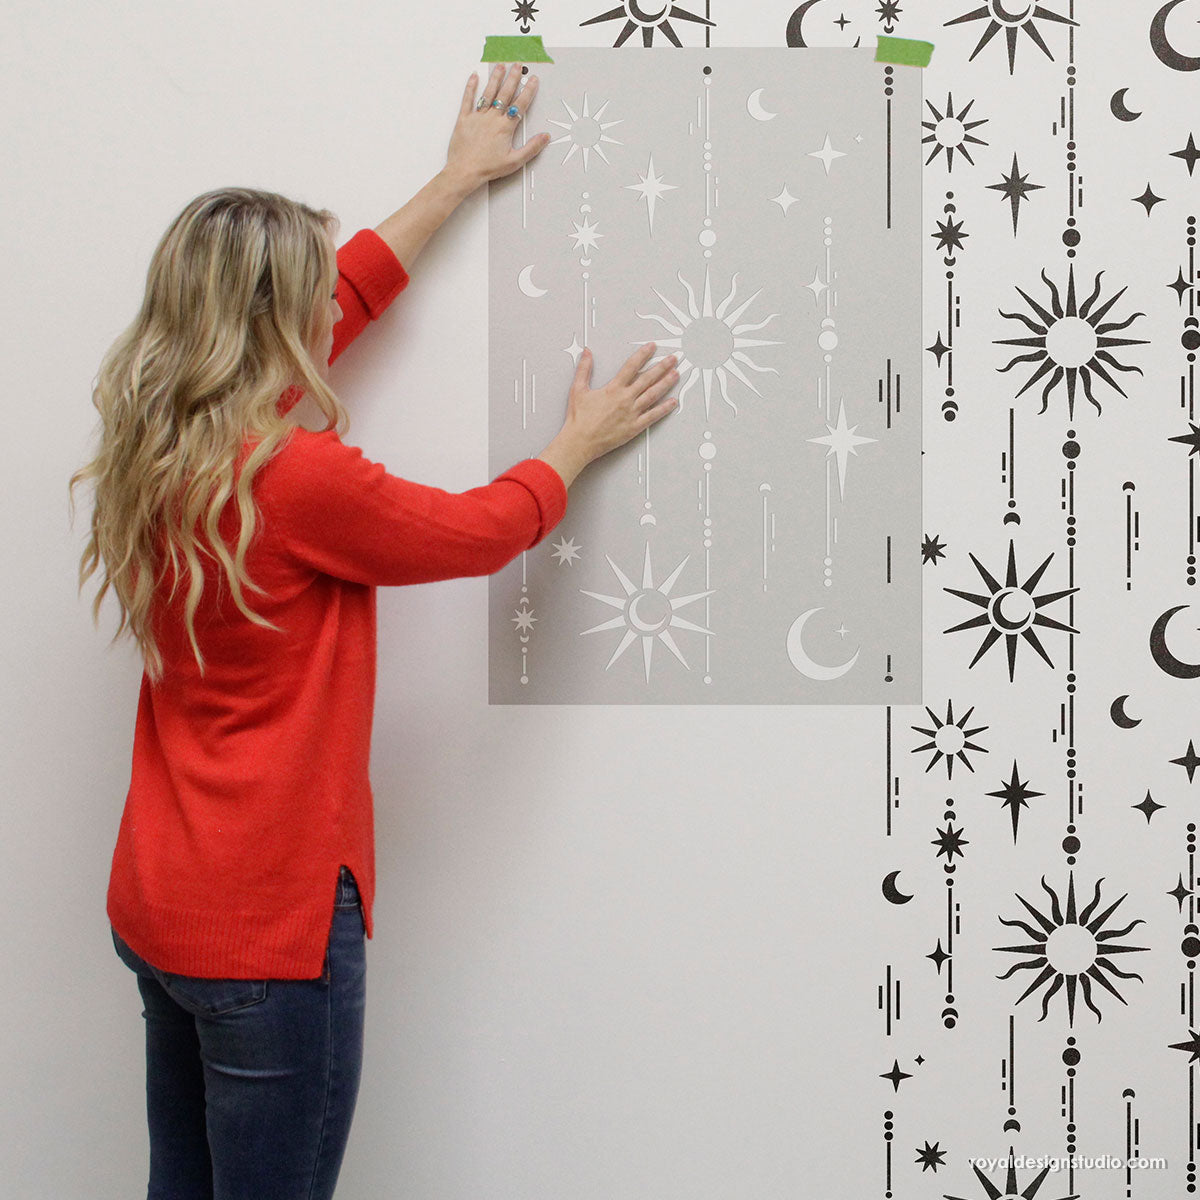 Stenciling walls with large star and moon celestial stencil